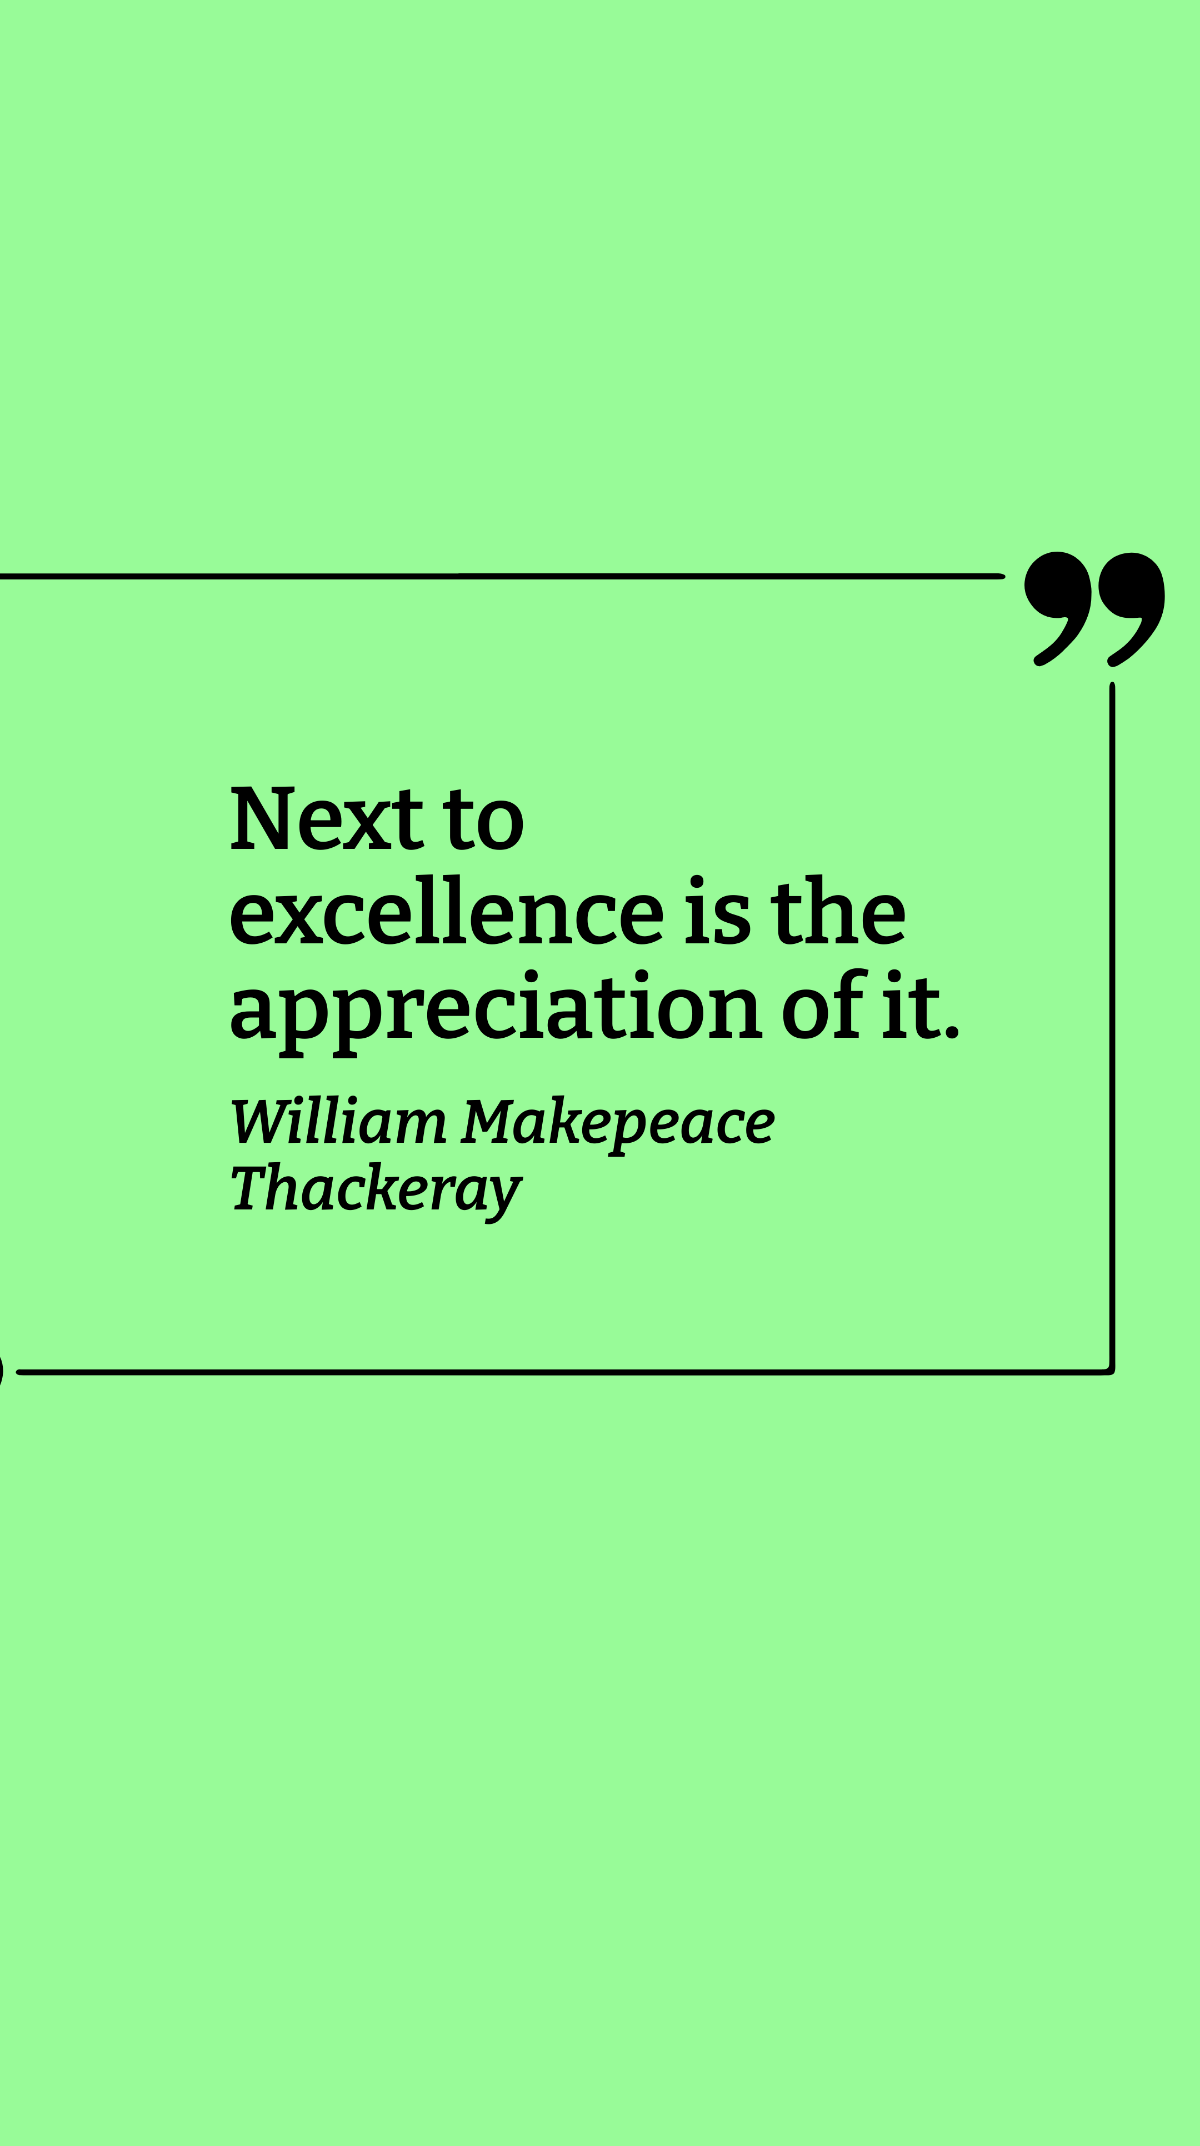 William Makepeace Thackeray - Next to excellence is the appreciation of it.